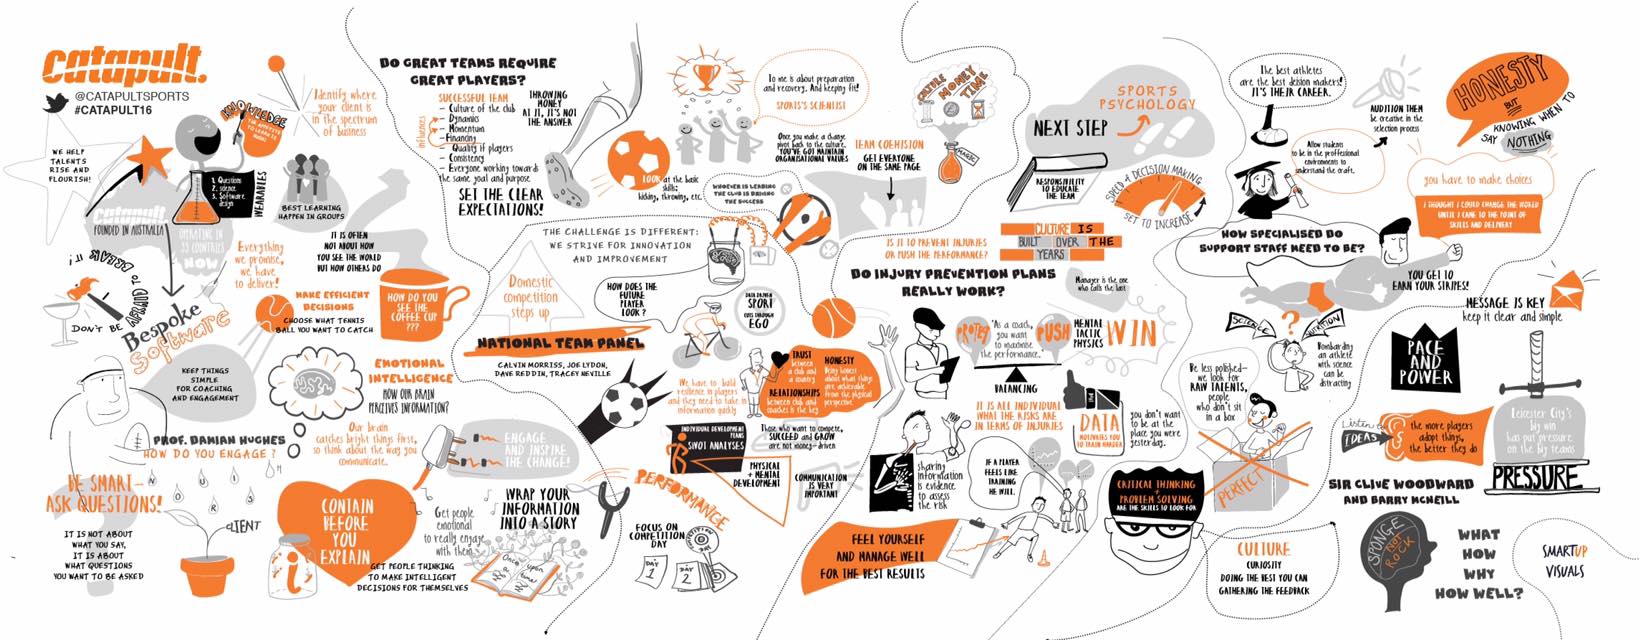 Infographic, drawn live during a conference